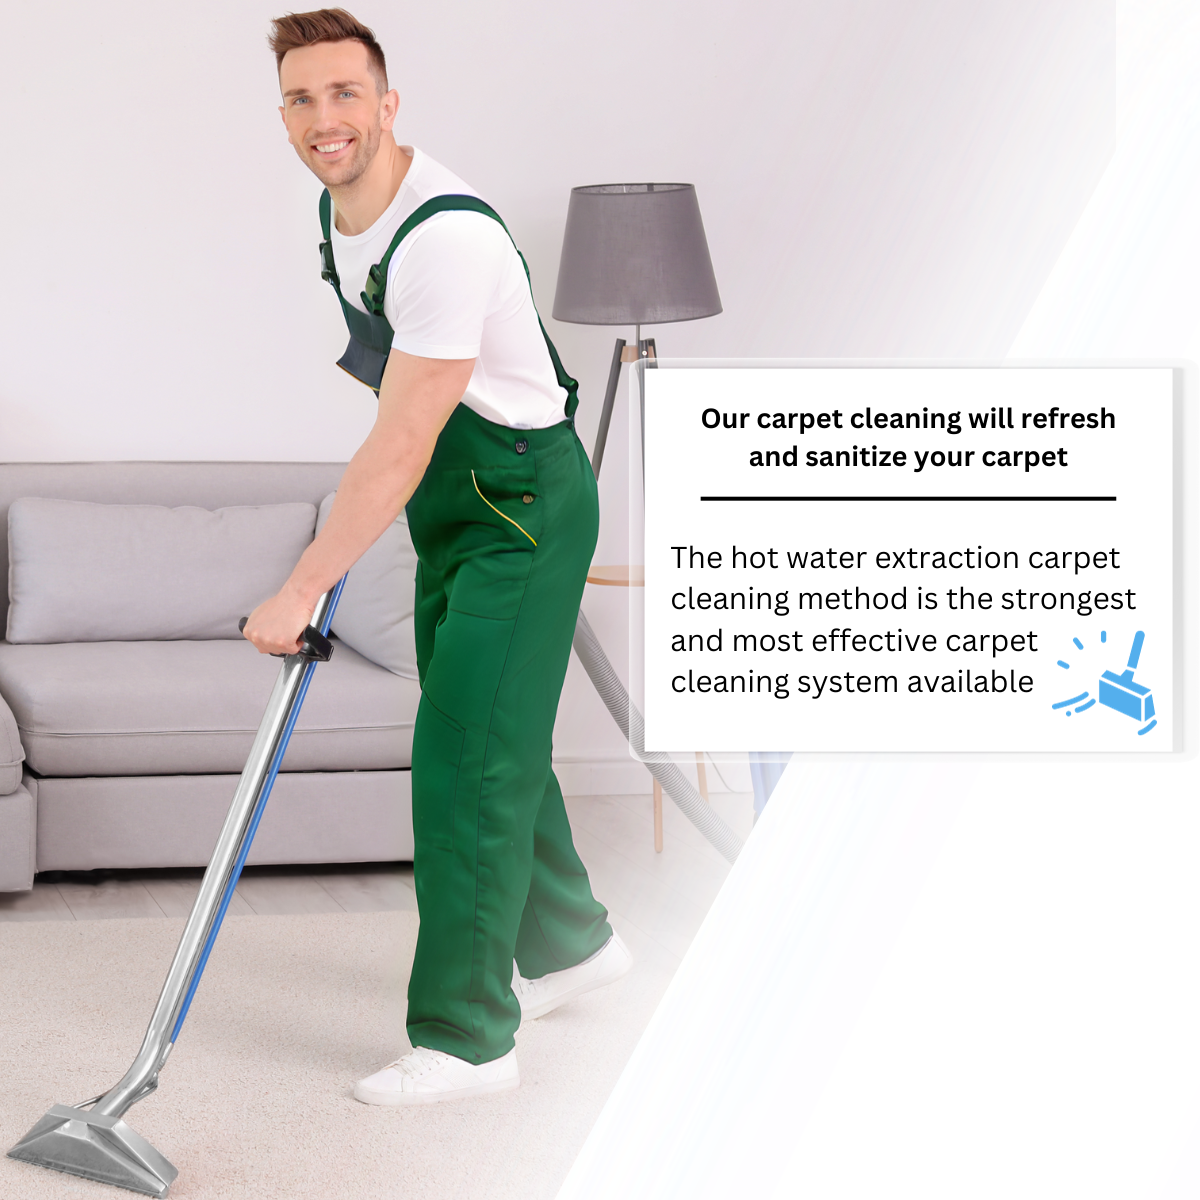 carpet cleaning manchester image 104